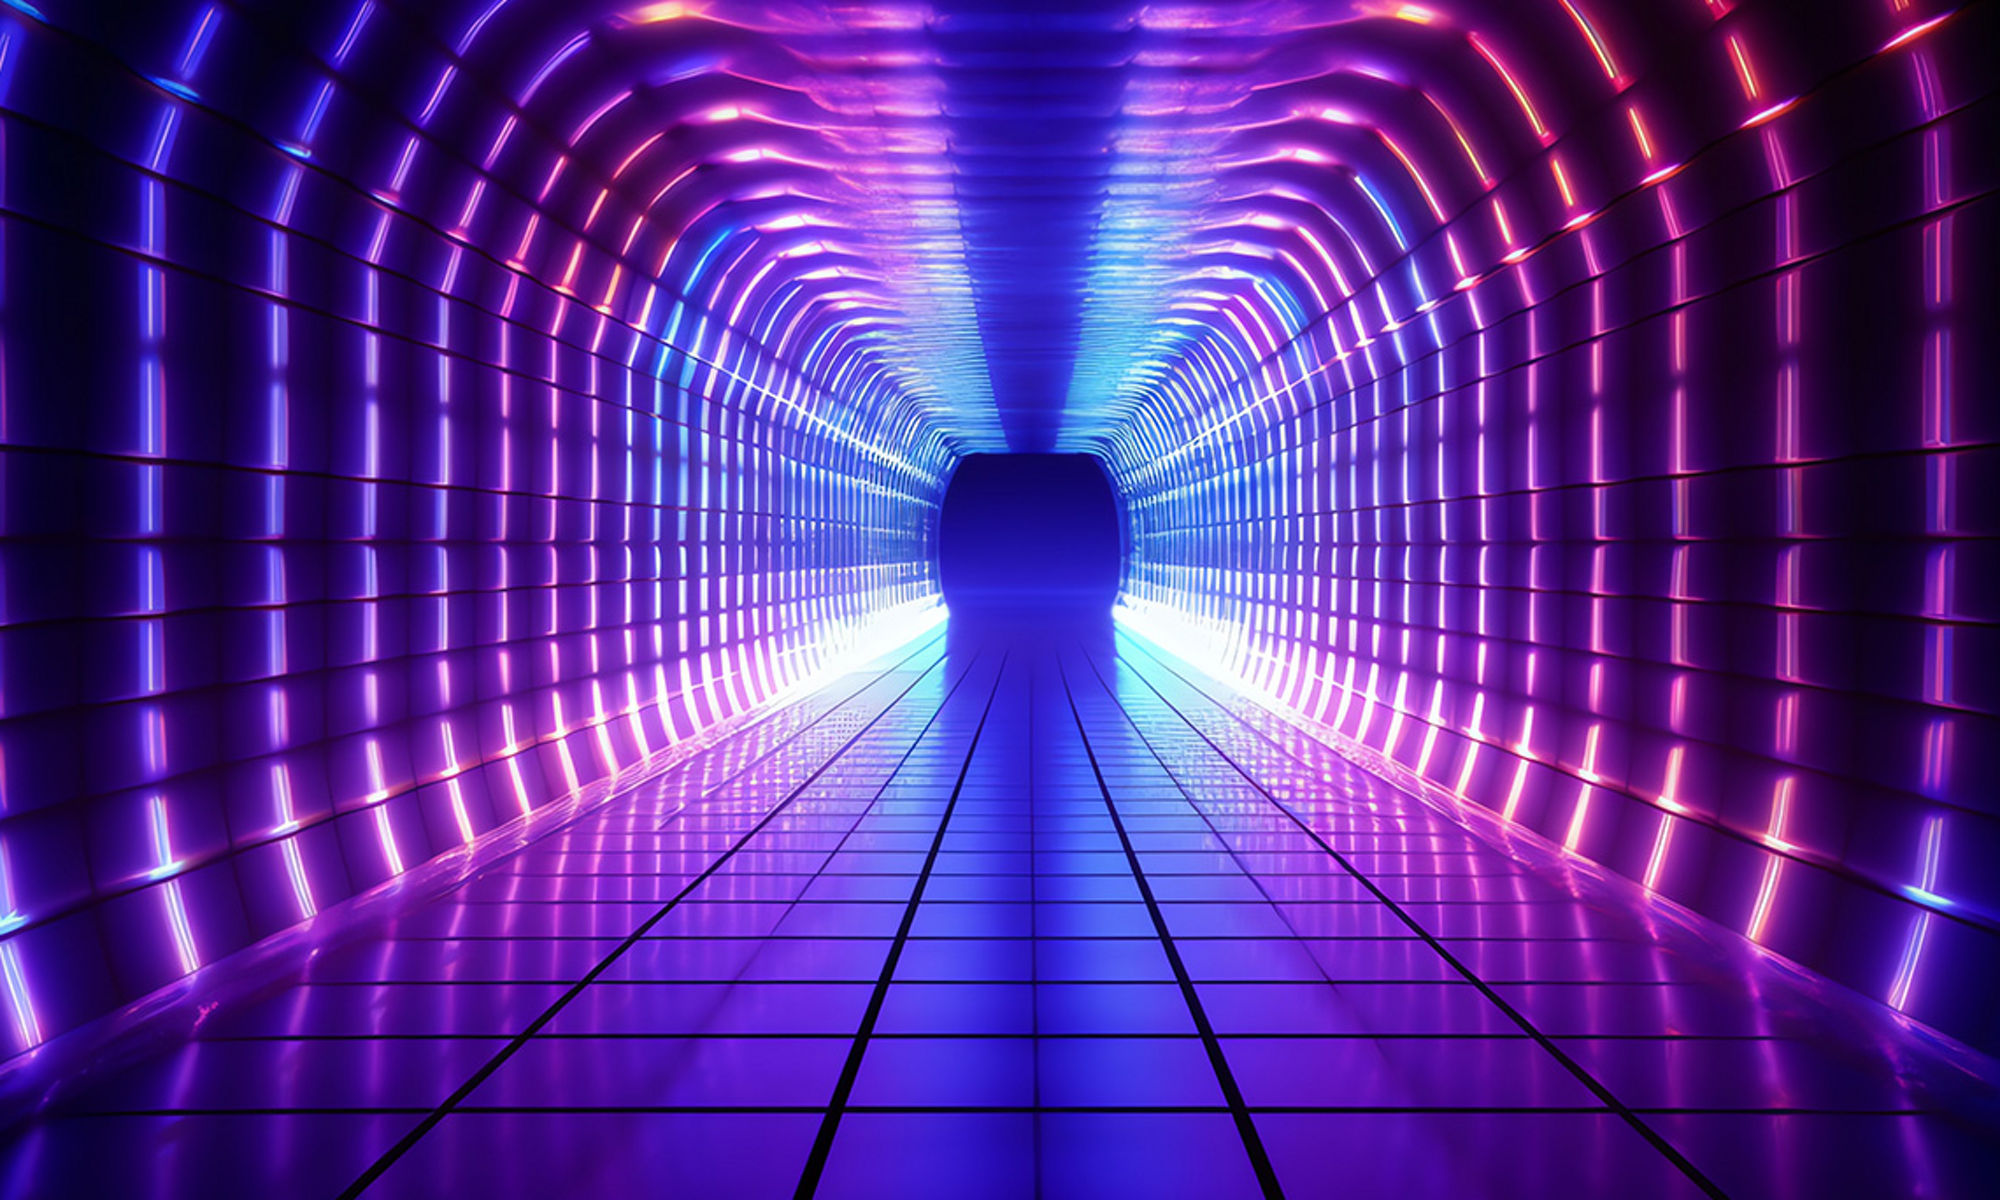 Purple and blue light bars forming a hallway